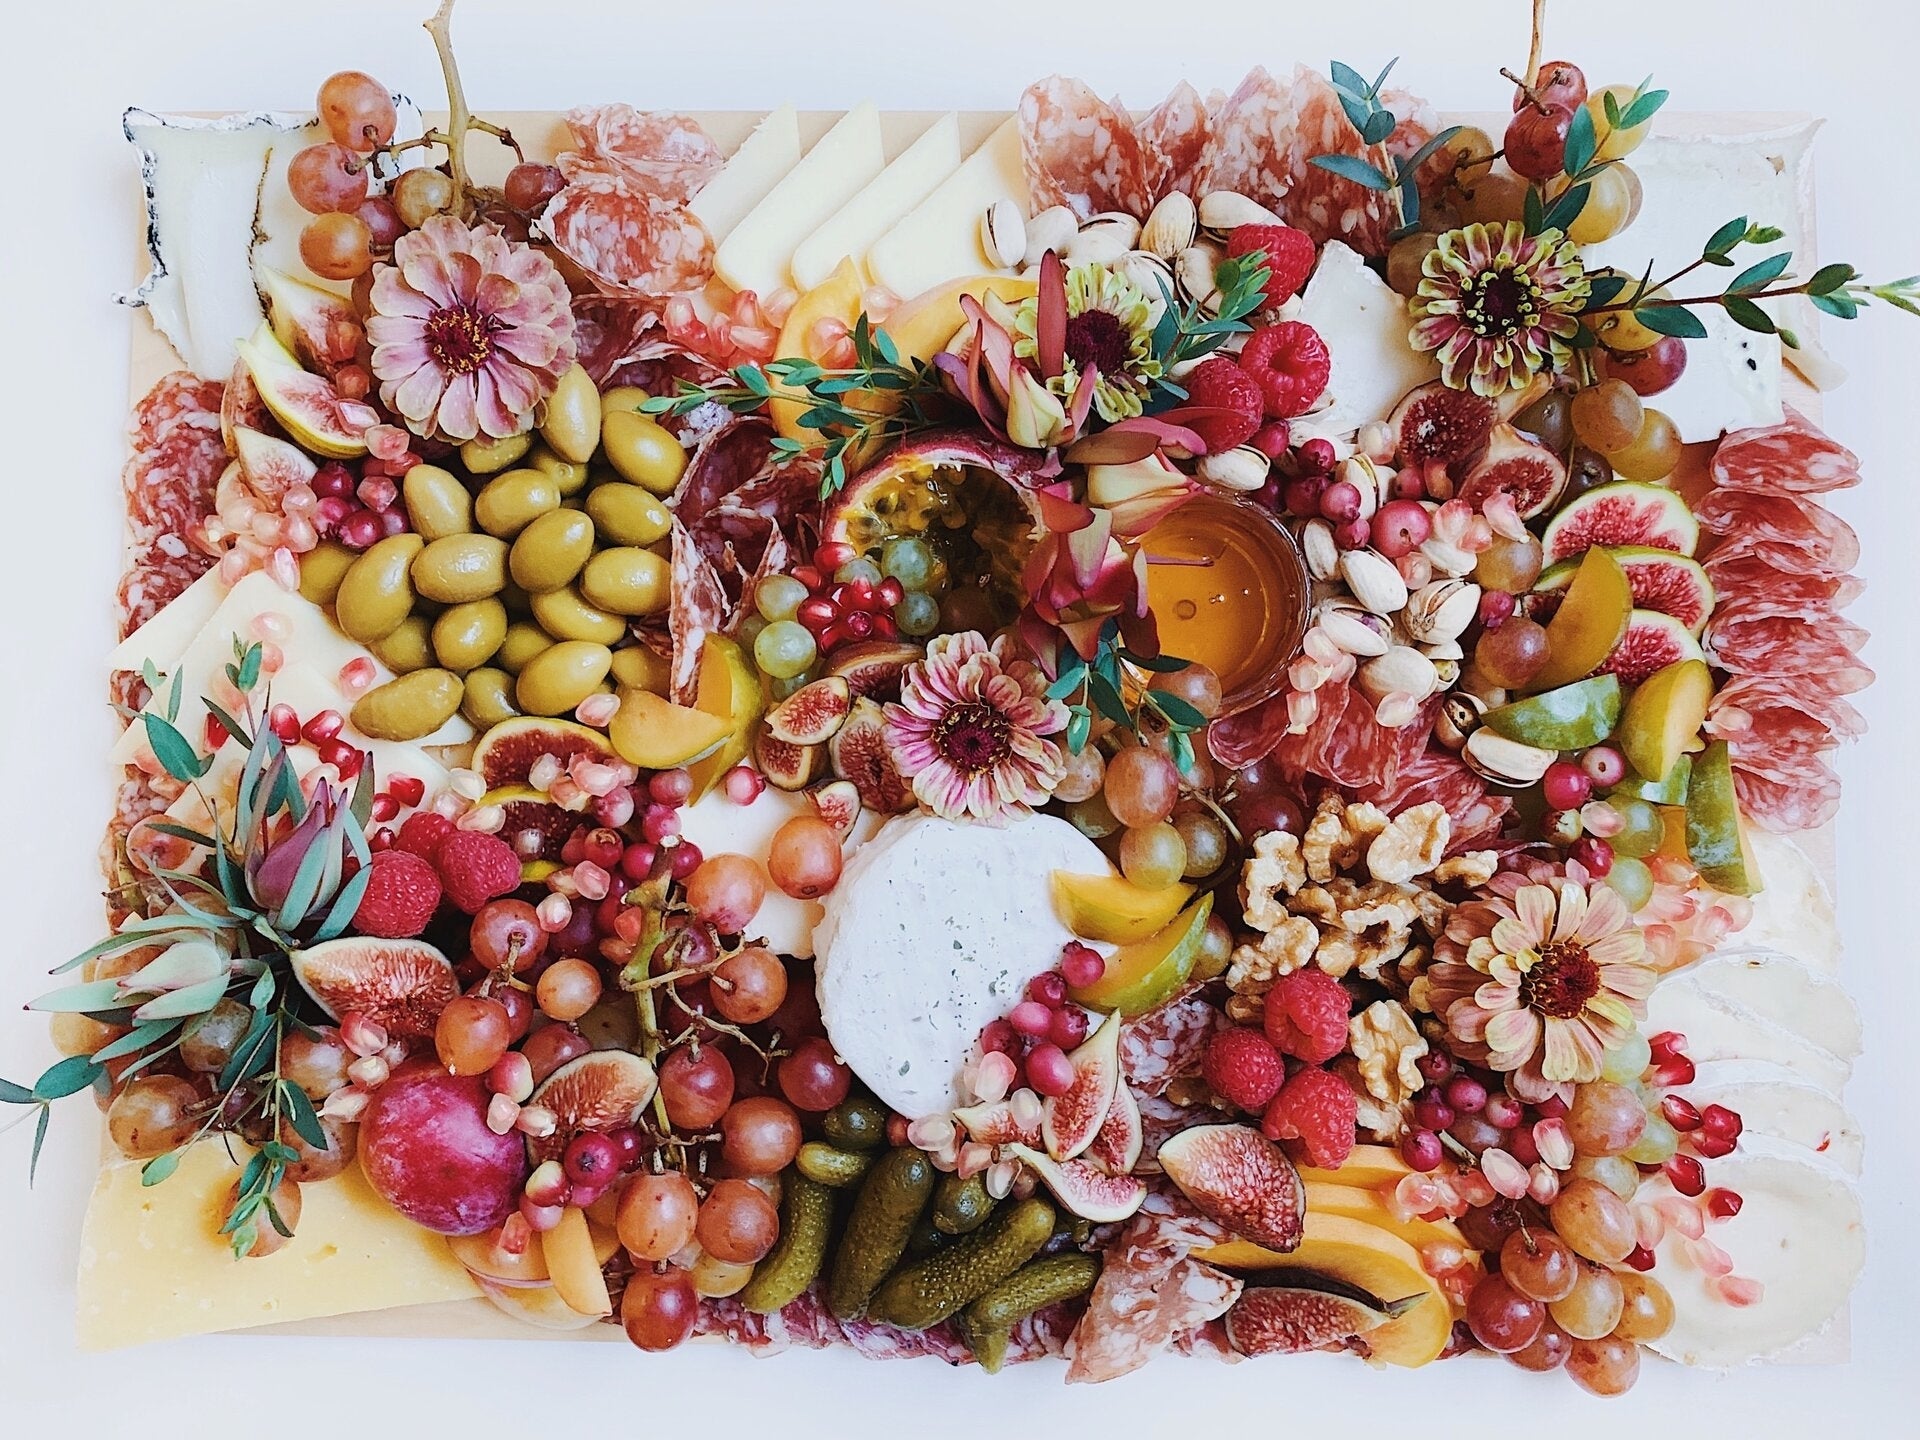 A large charcuterie board features cheeses, meats, olives, fruits, honey and flowers.